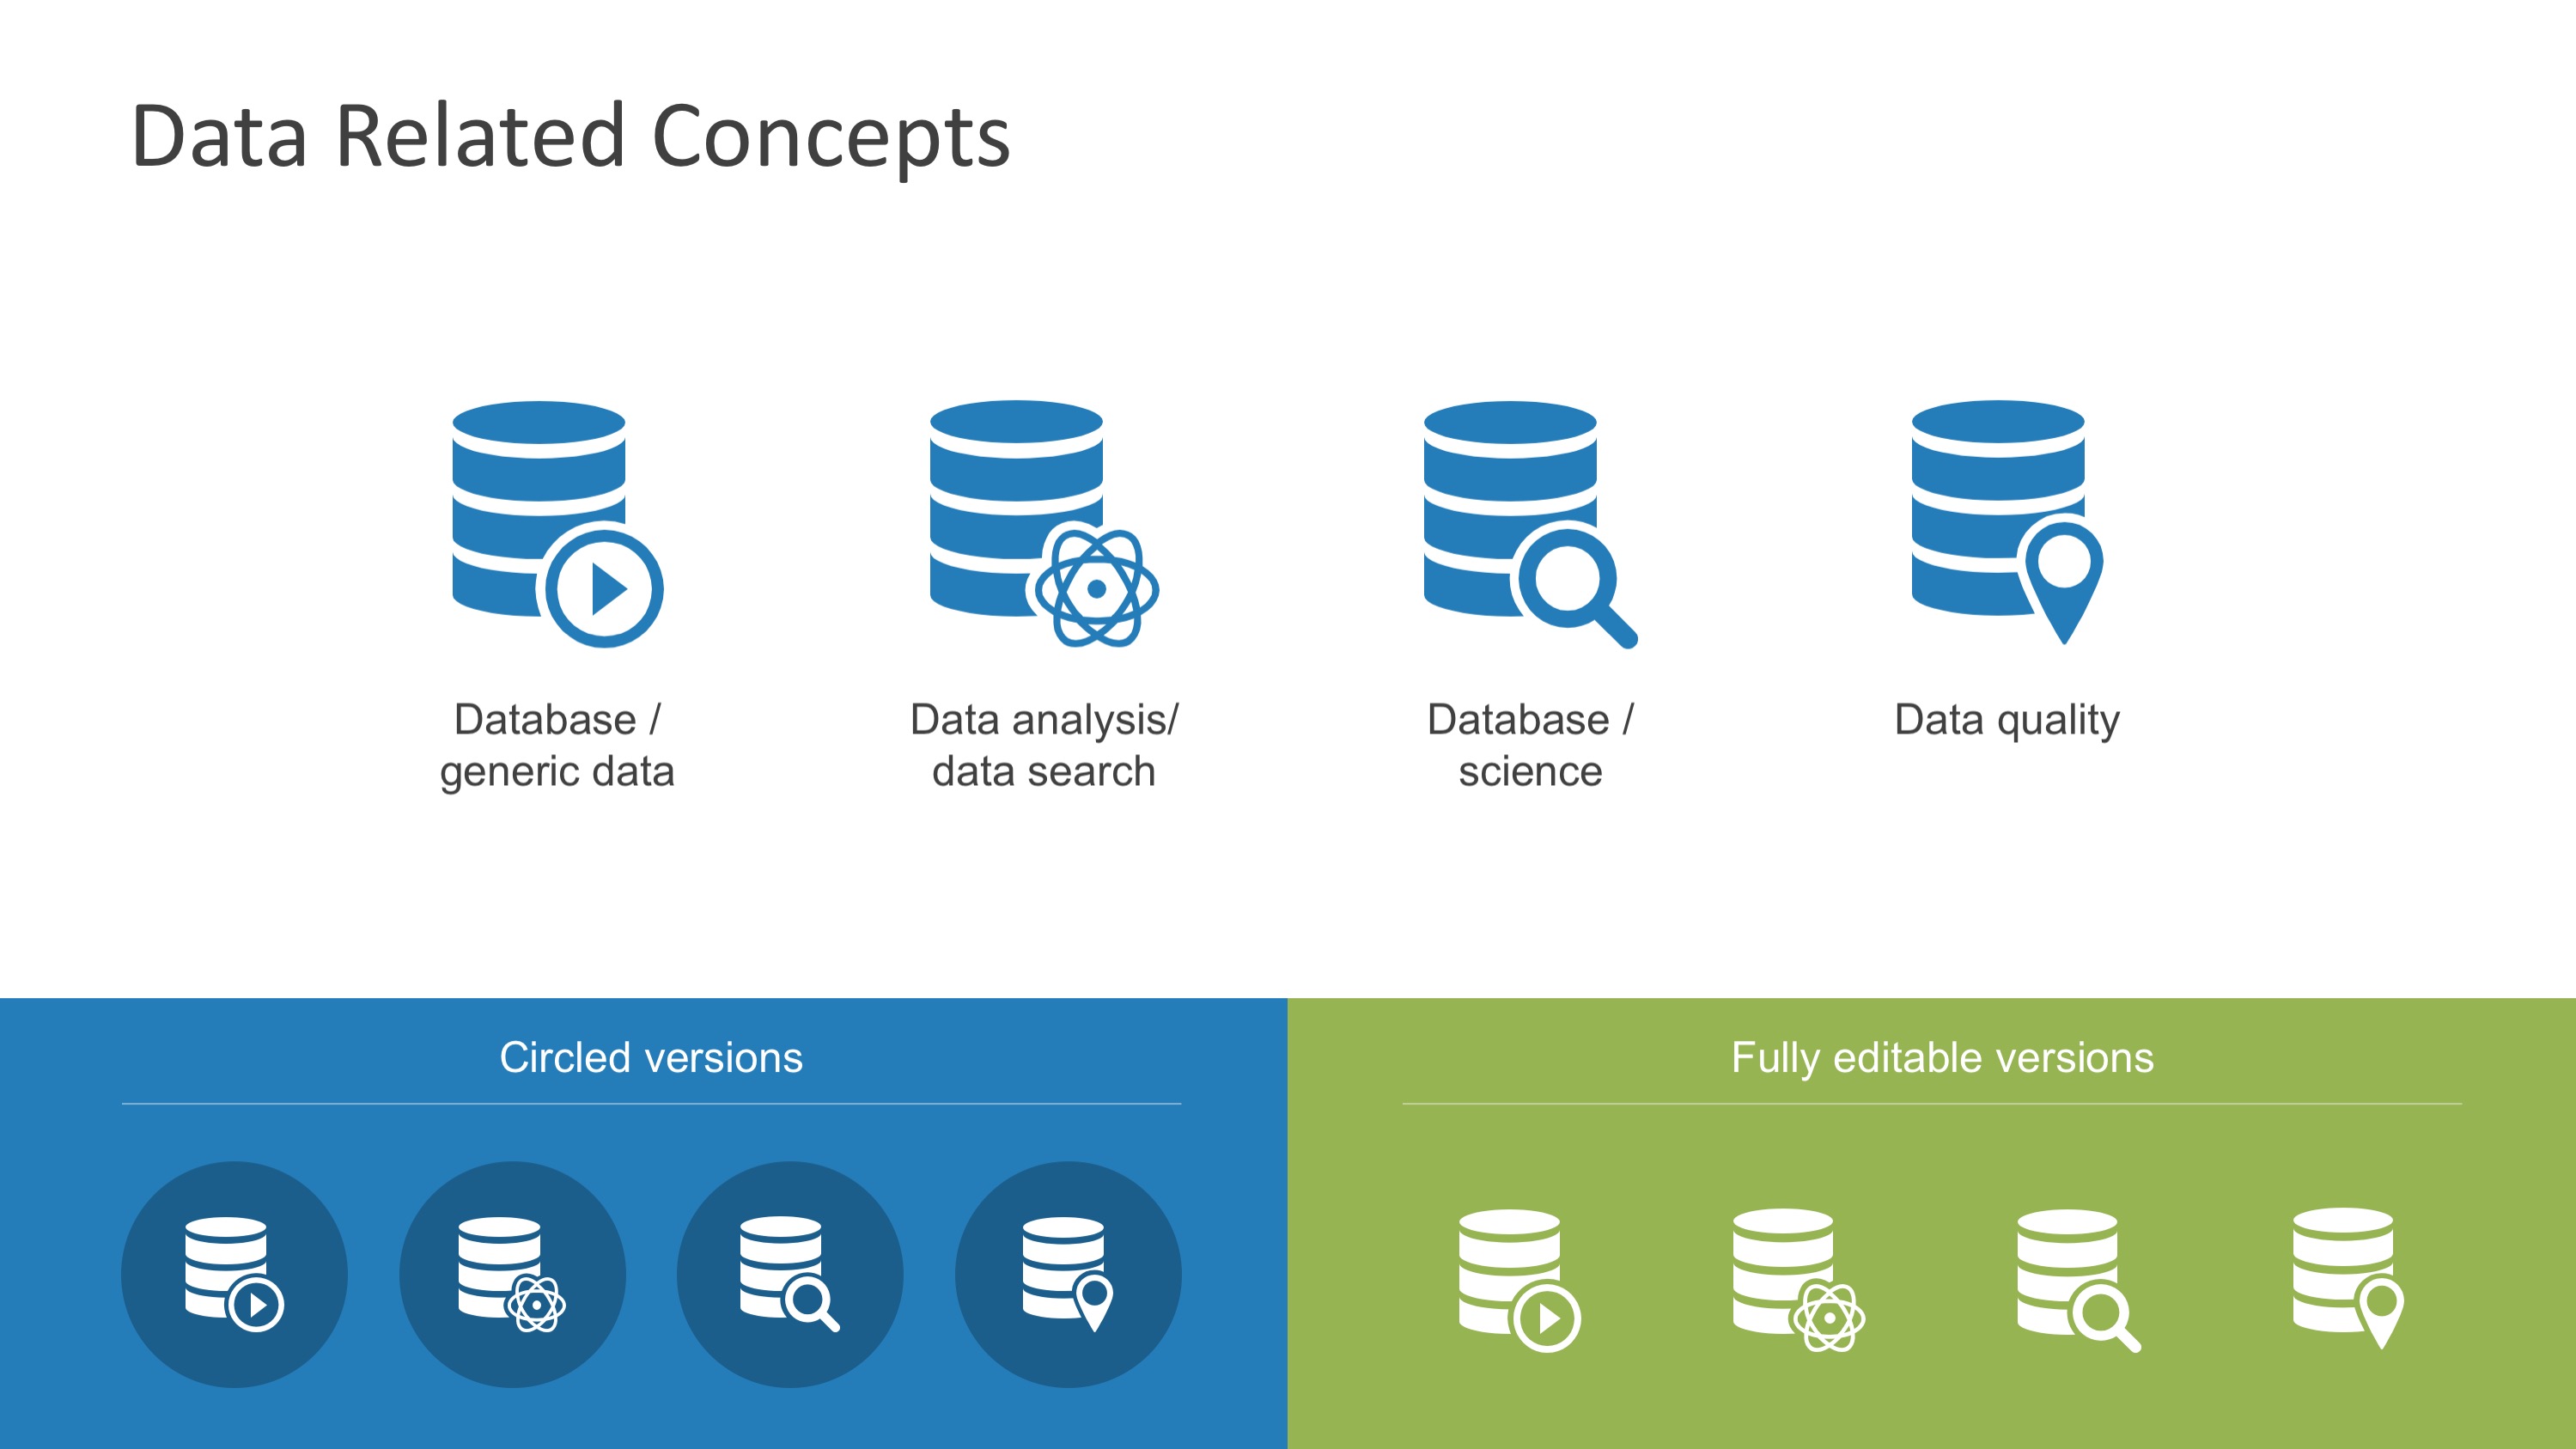 Related data. Database Concept. Database Analysis фон. Database Management Concepts. The main Concepts of databases.